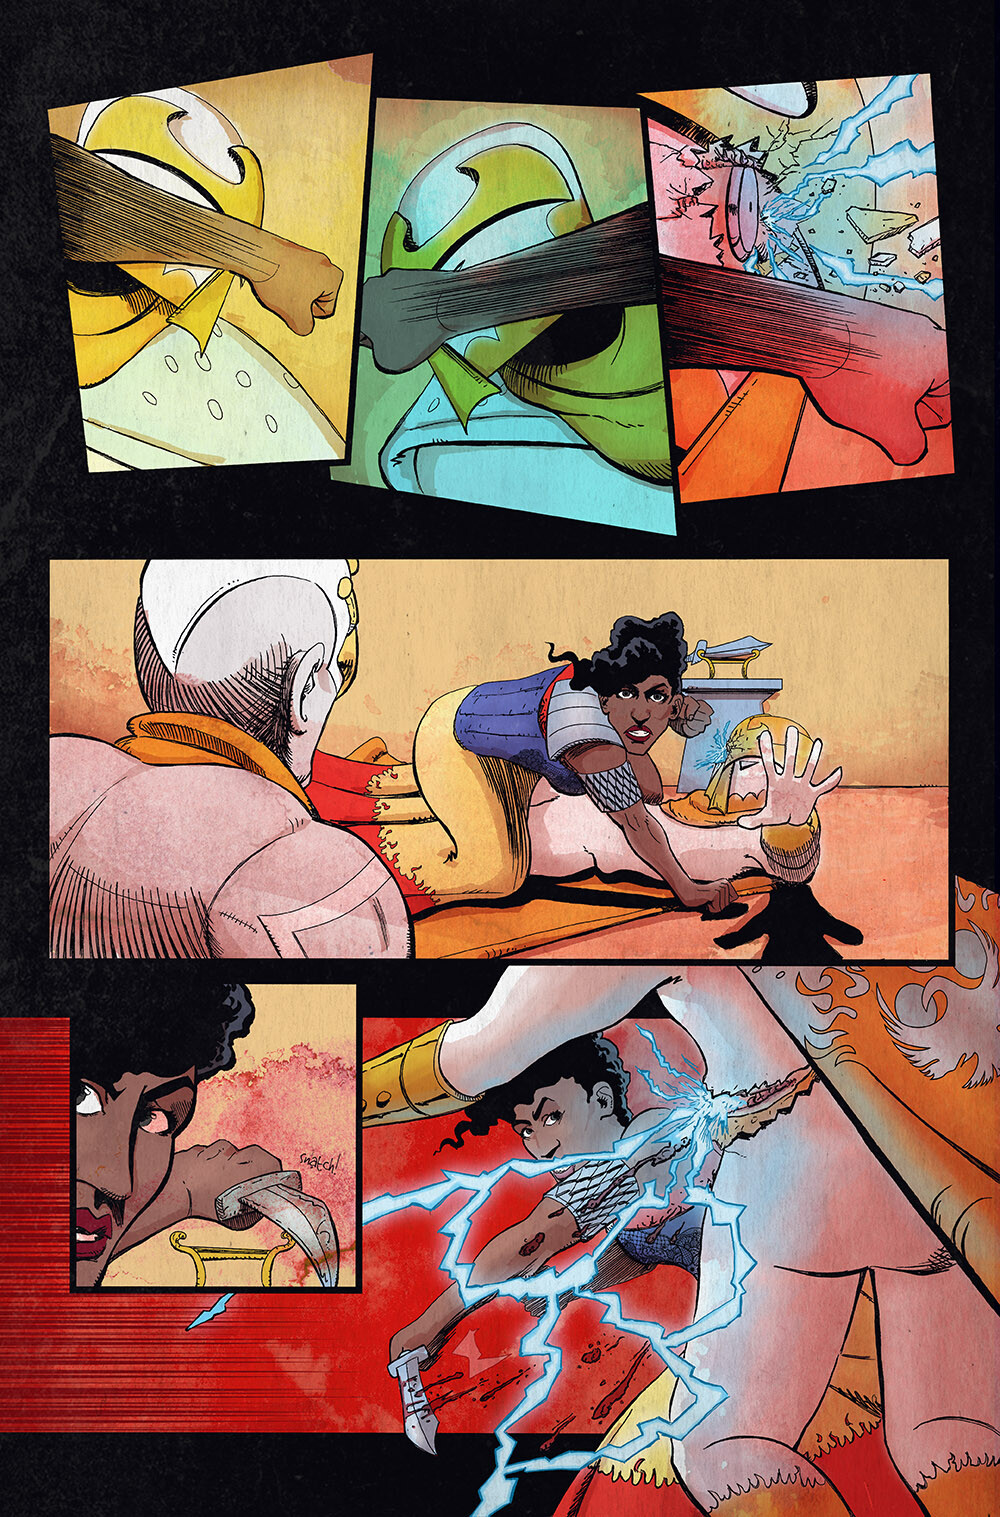 Vagrant Queen: A Planet Called Doom #3 pg 06